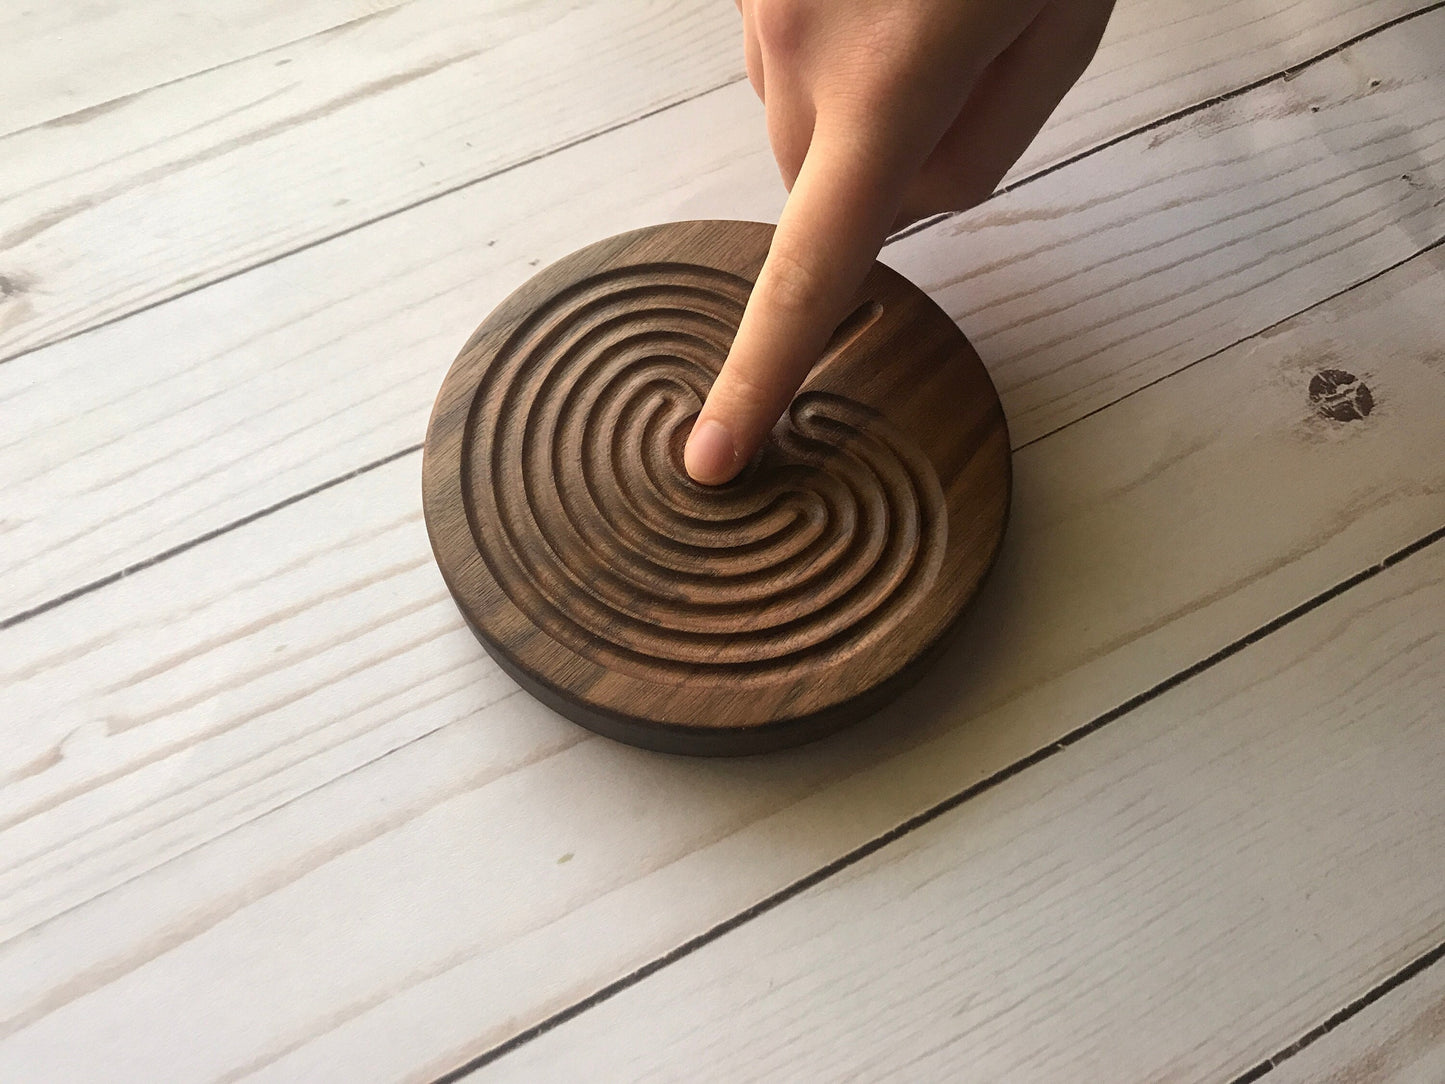 Small Classical Finger Labyrinth, Round, 4.75" diameter, Walnut Wood